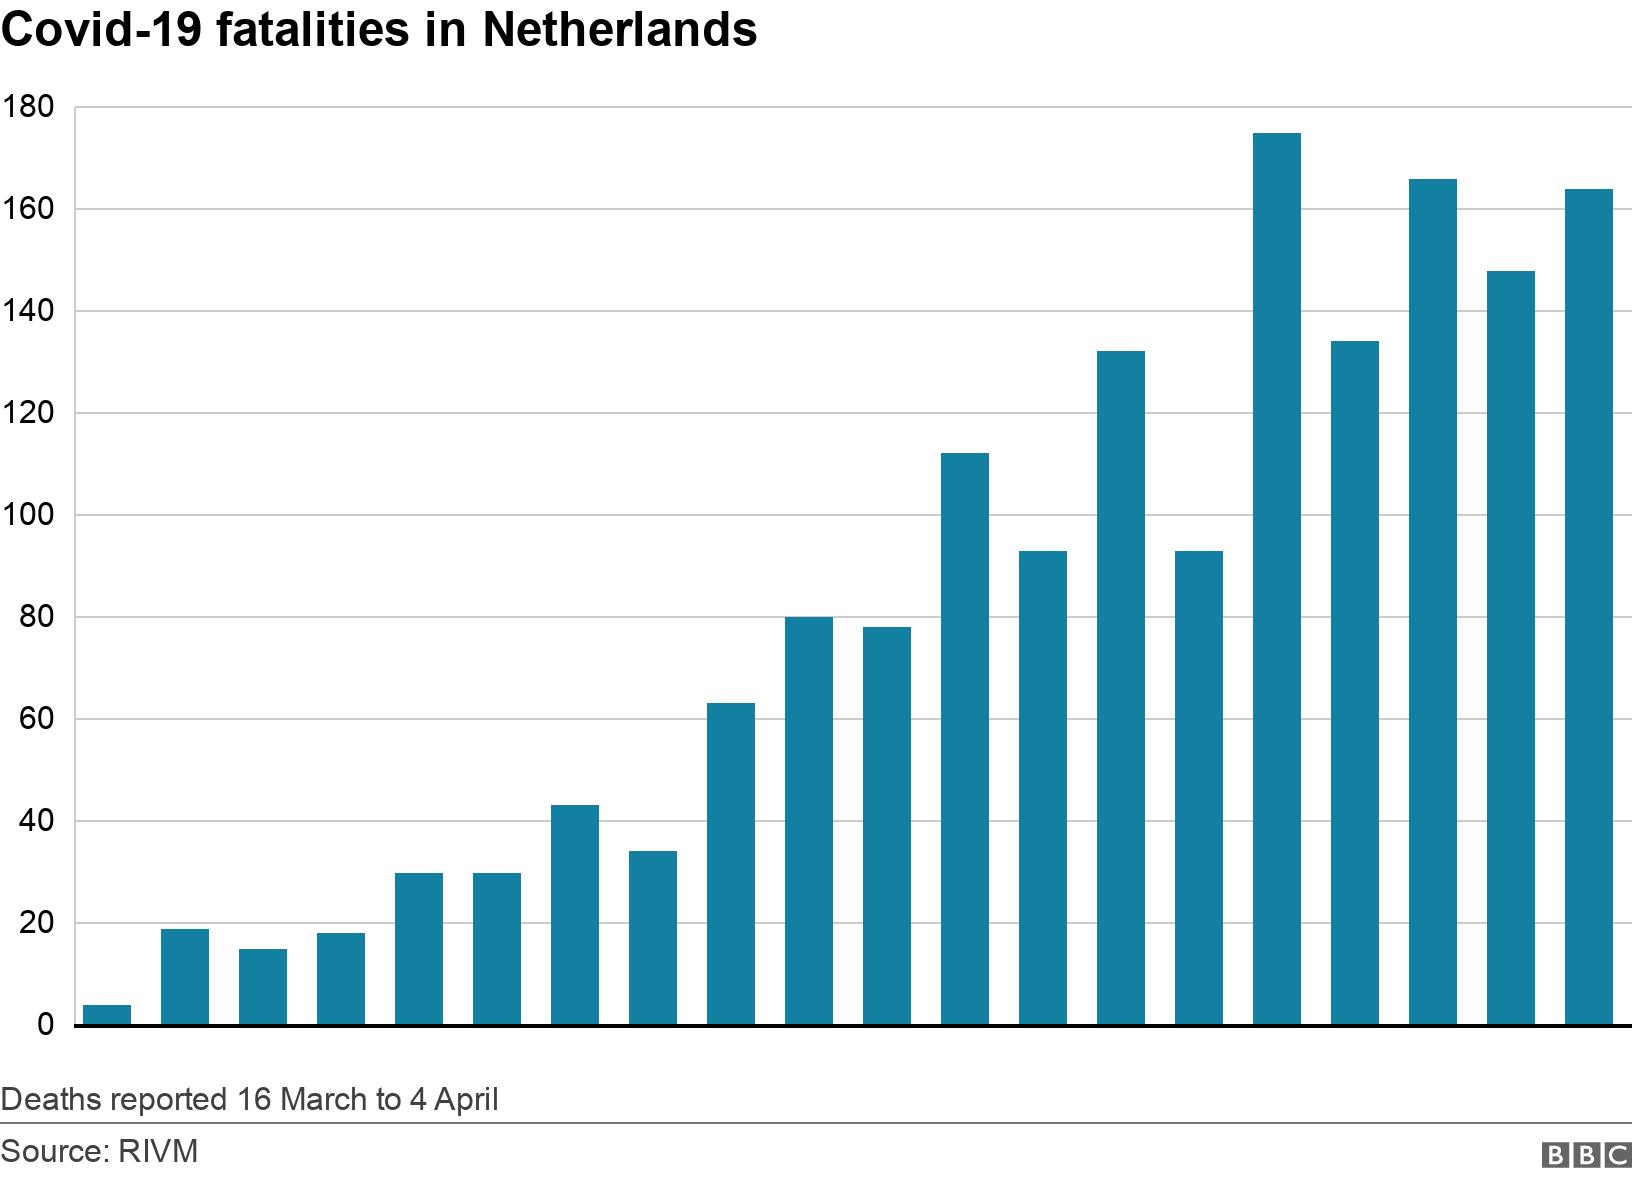 Covid-19 fatalities in Netherlands. .  Deaths reported 16 March to 4 April.